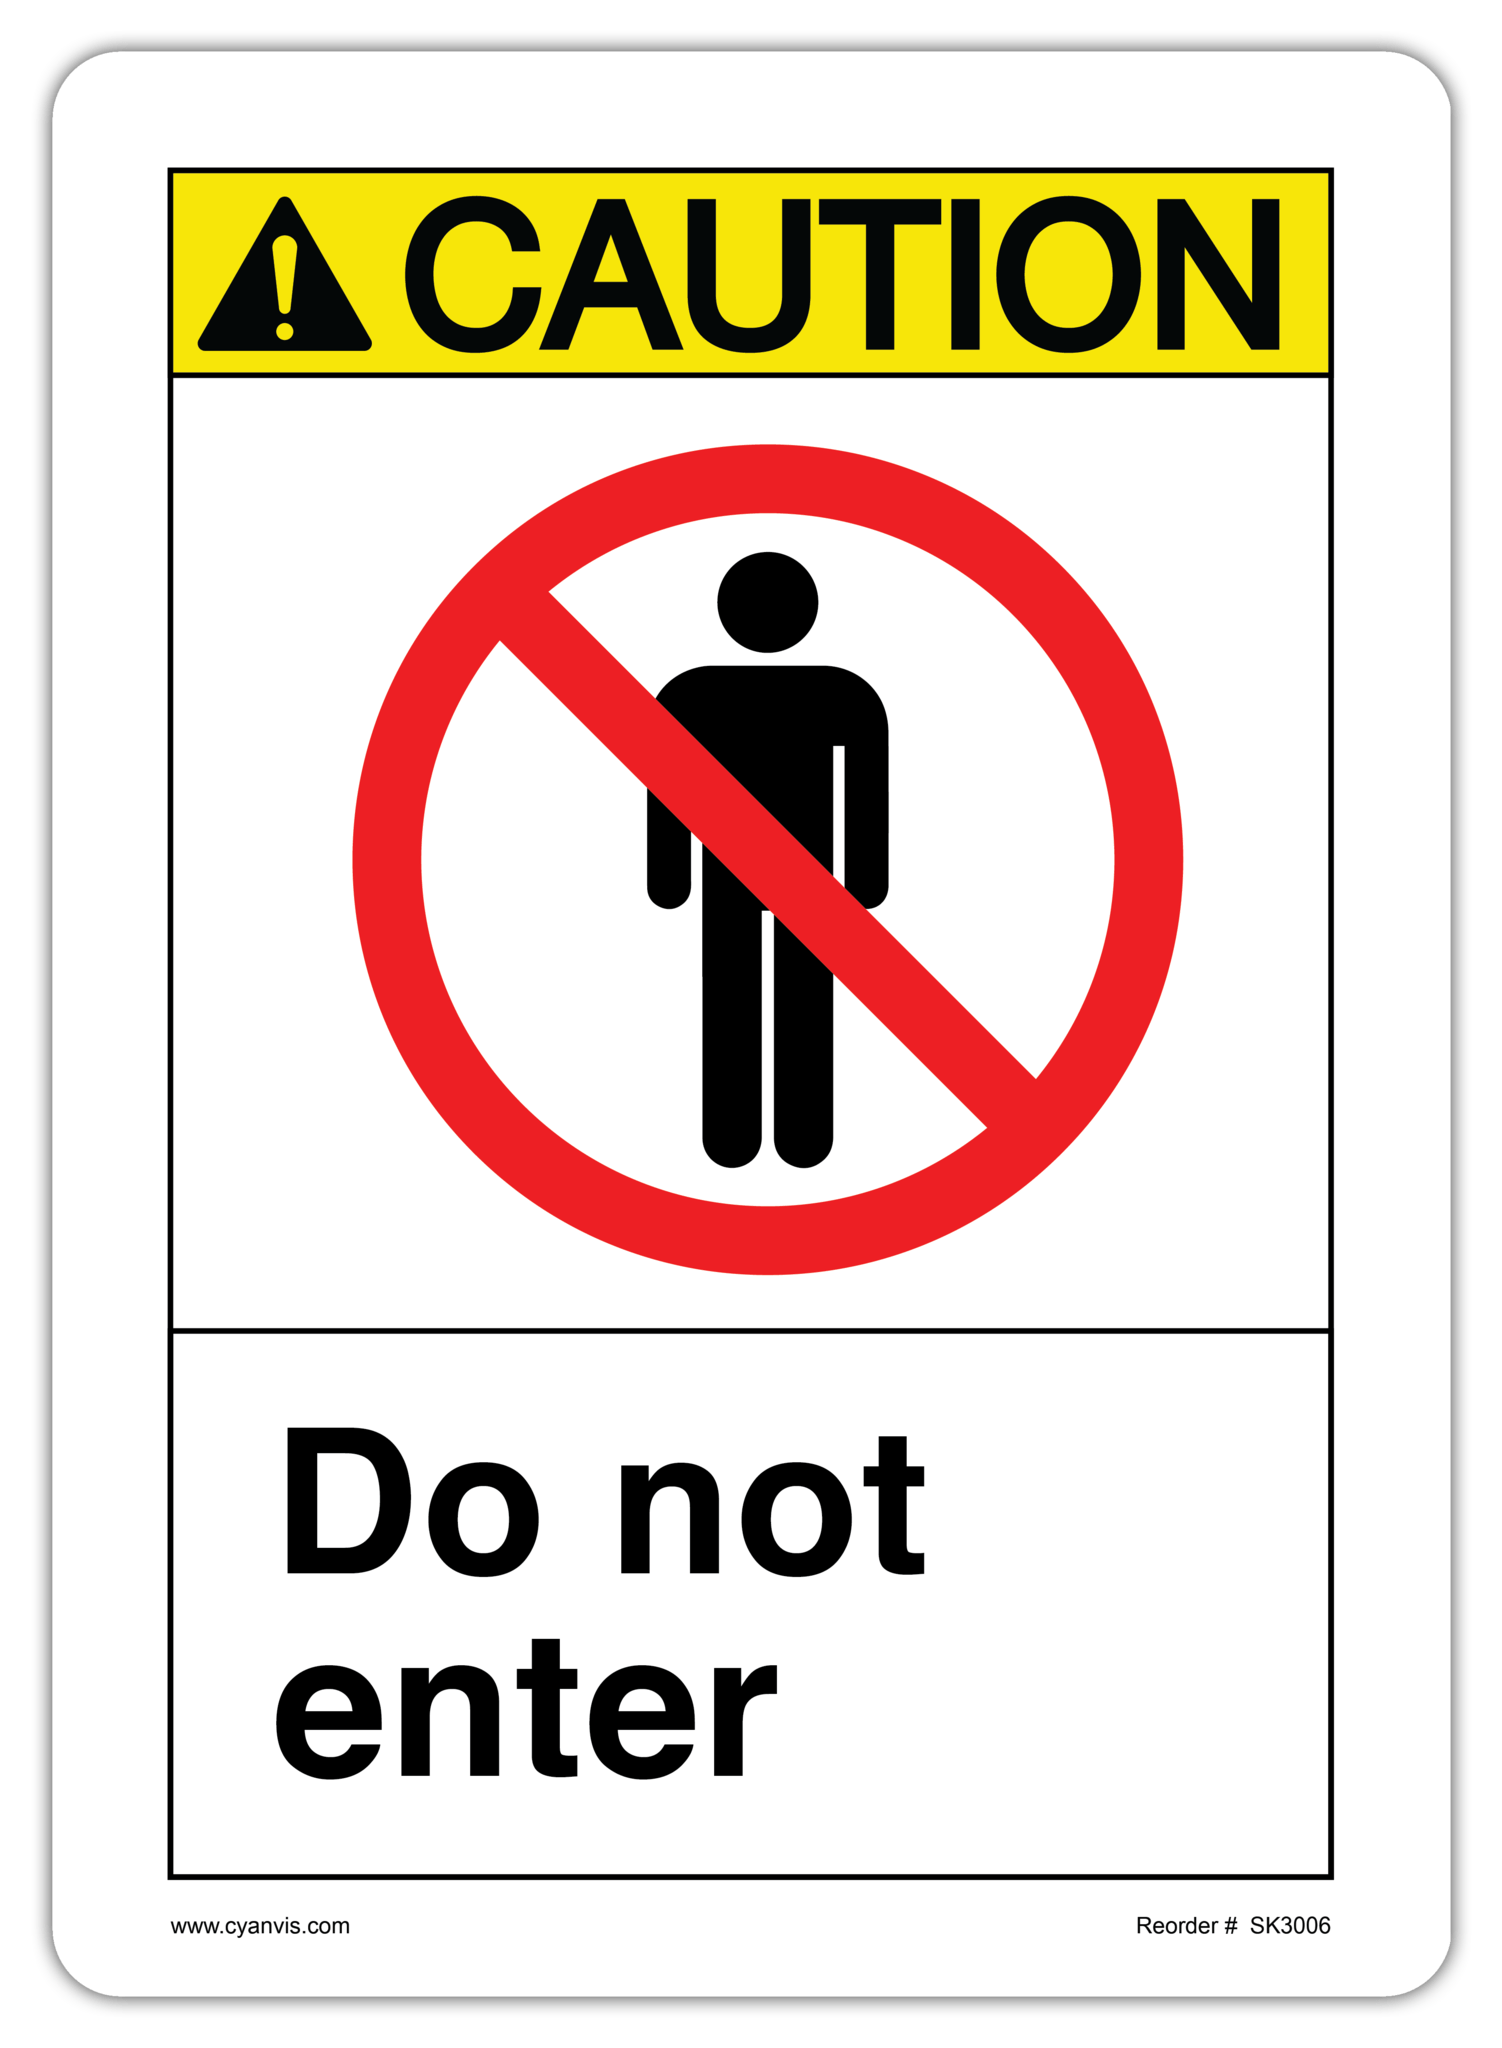 Safety Sign: ASNI - Caution - DO NOT ENTER - CYANvisuals